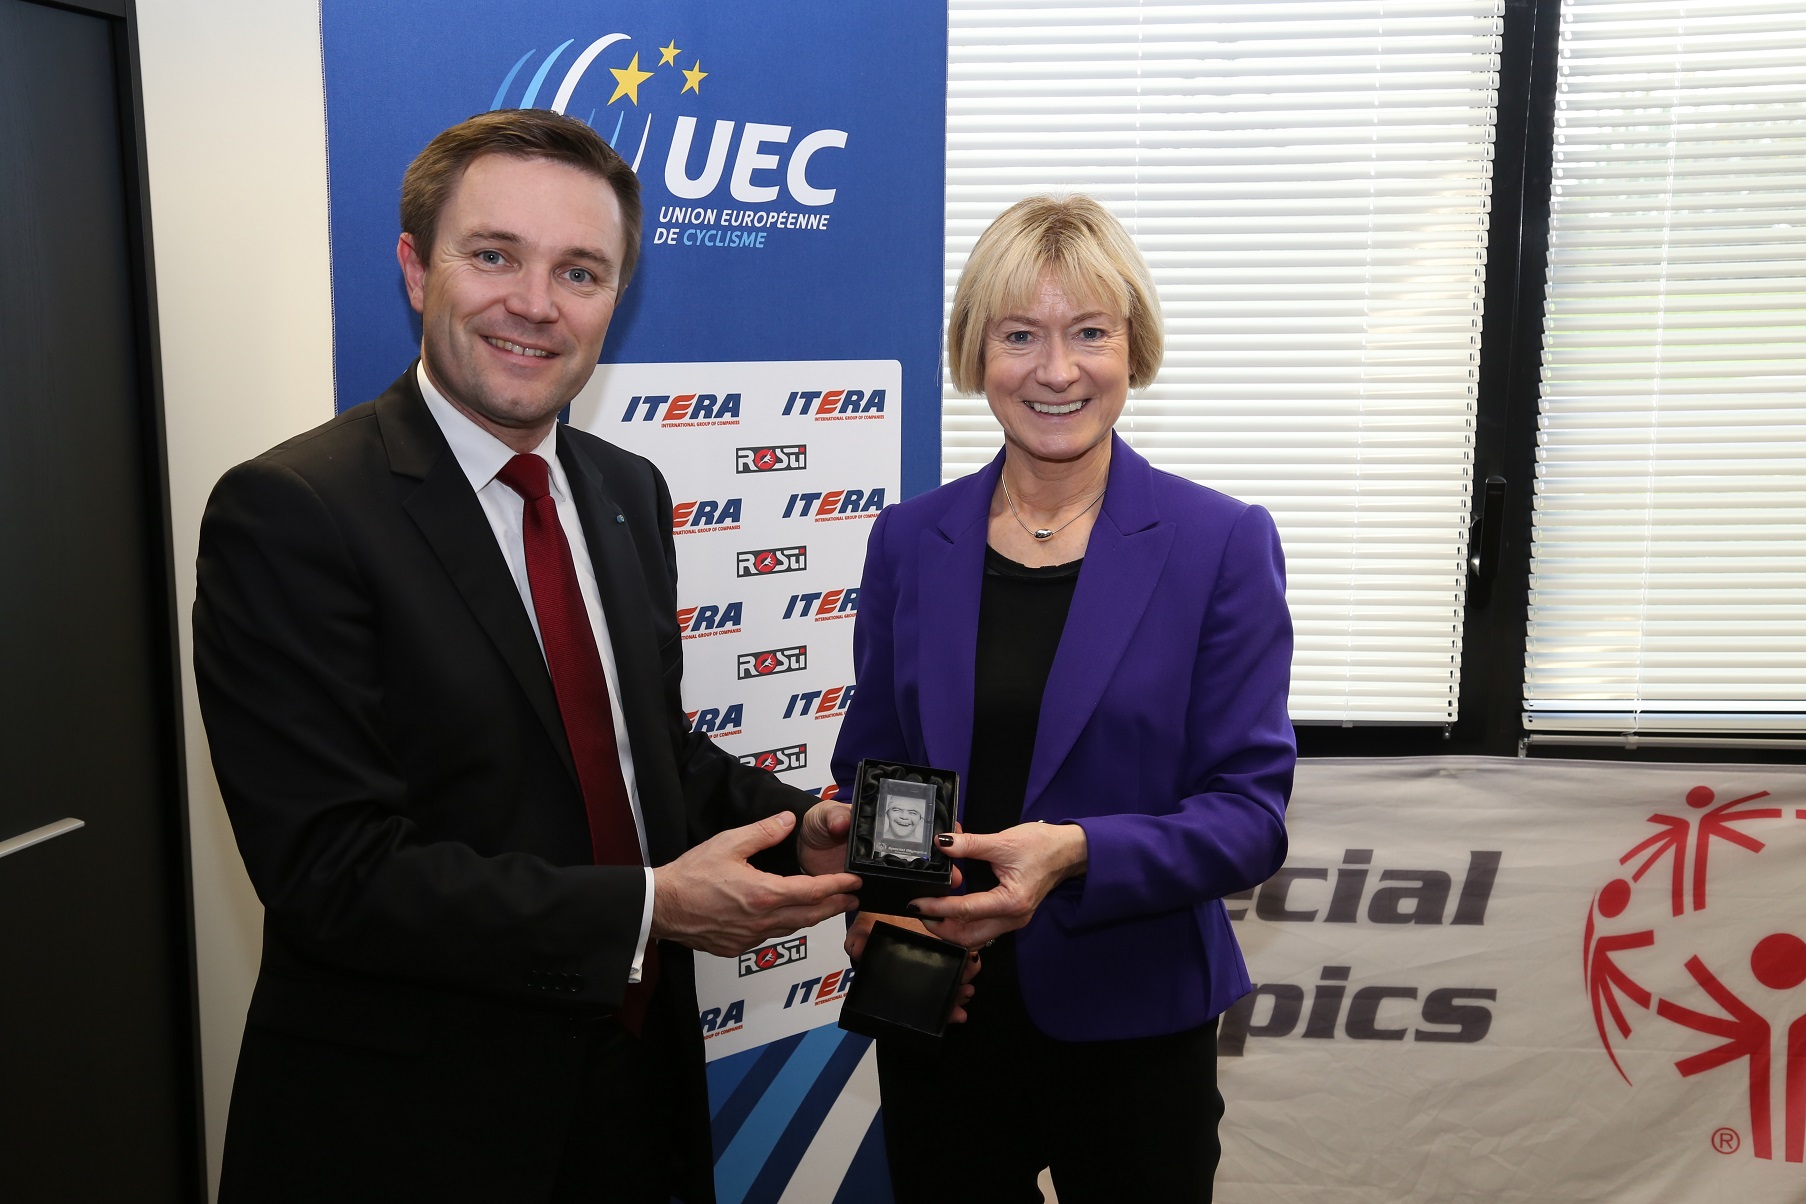 David Lappartient (left), President of the UEC, and Mary Davis (right), regional President of SOEE, commemorate the agreement ©UEC